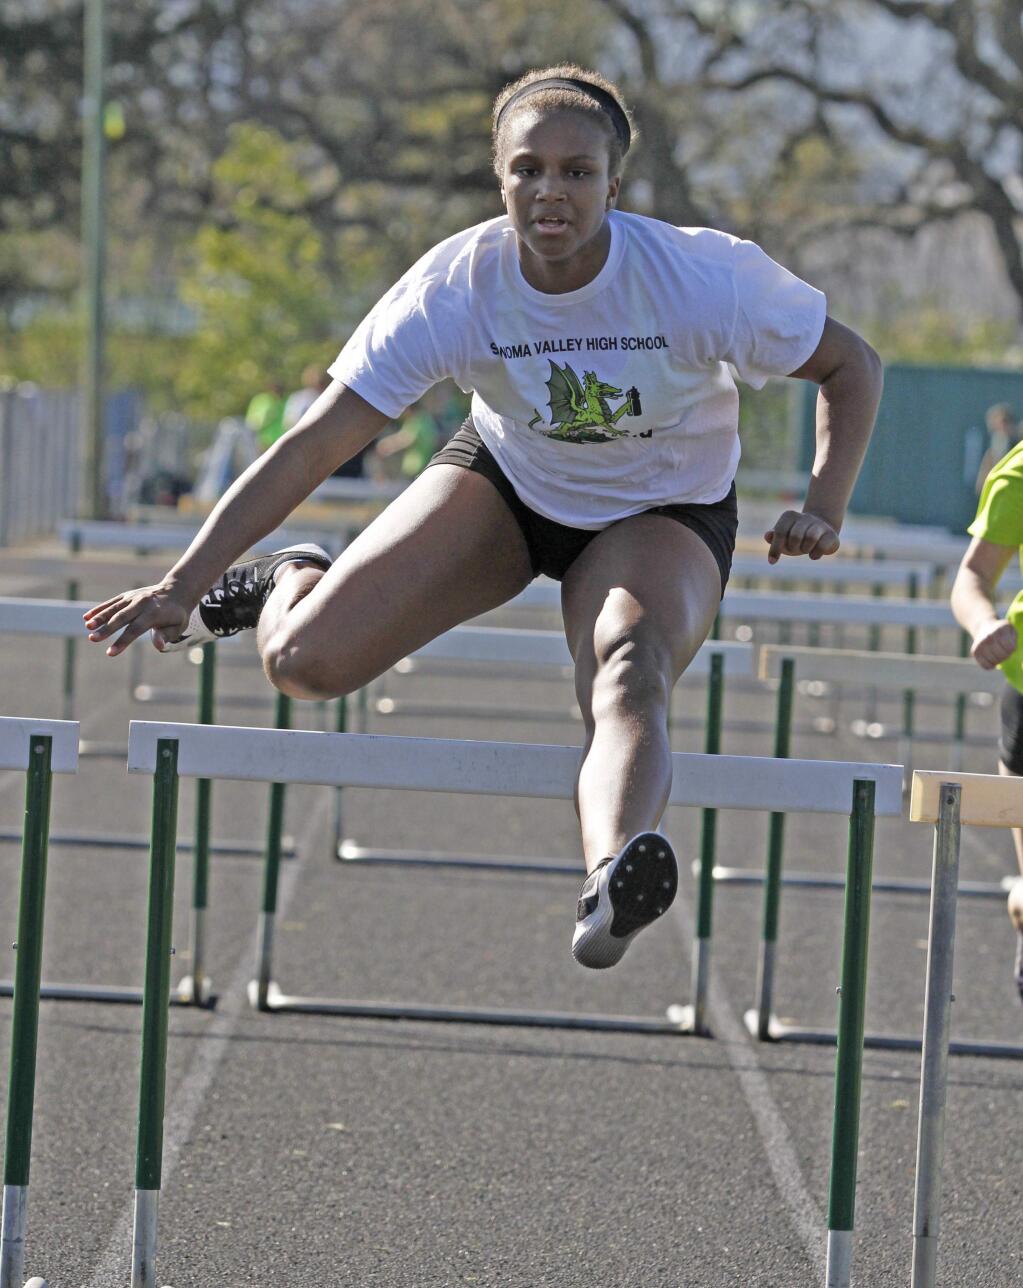 Bill Hoban/Index-TribuneSonoma's Kiara Miles won three events - including both hurdles races - Wednesday in an SCL meet with Petaluma and Elsie Allen.